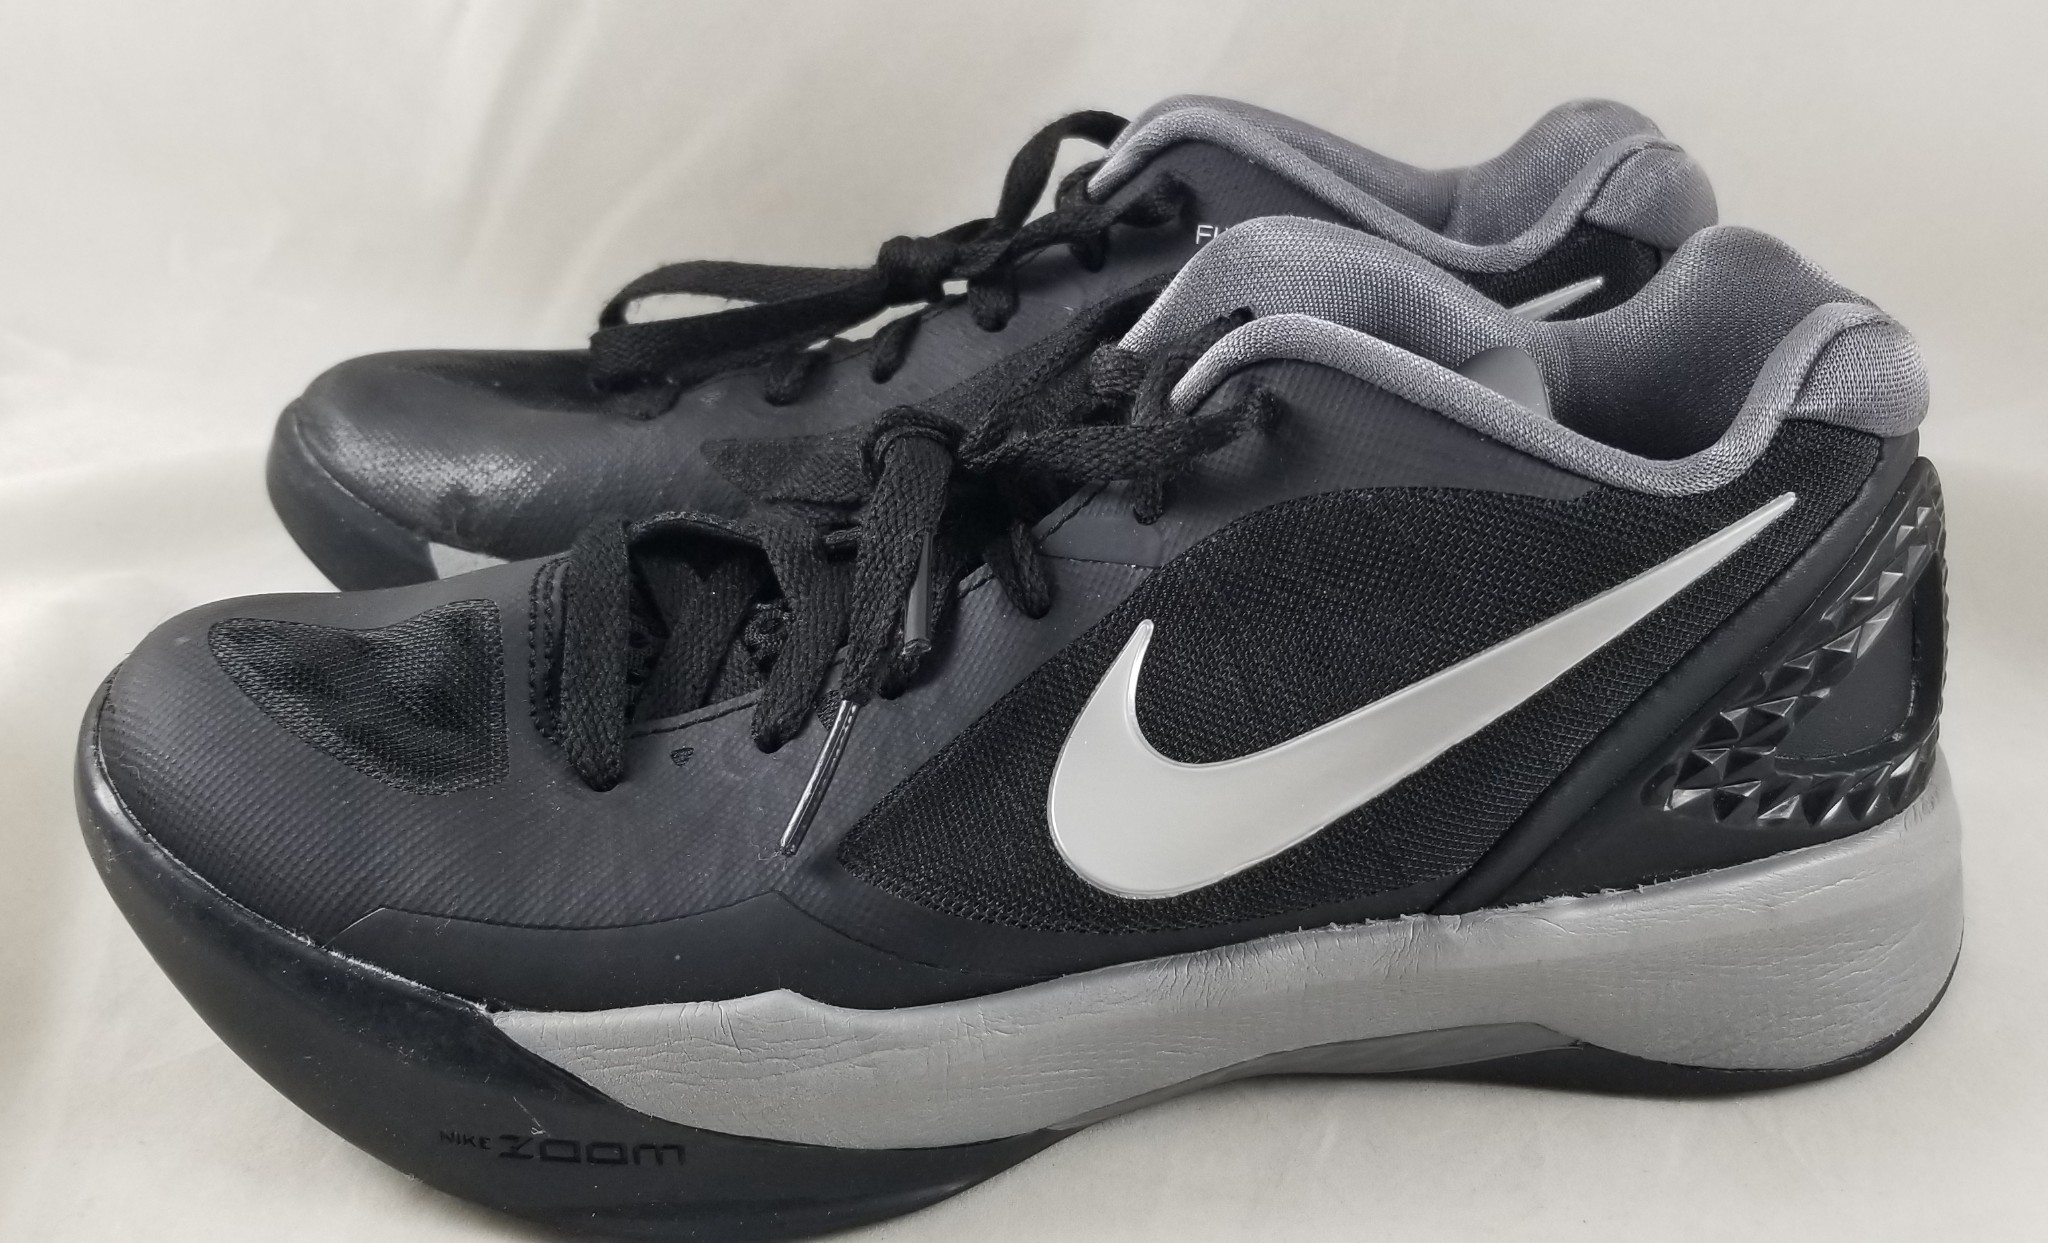 nike volleyball shoes hyperspike